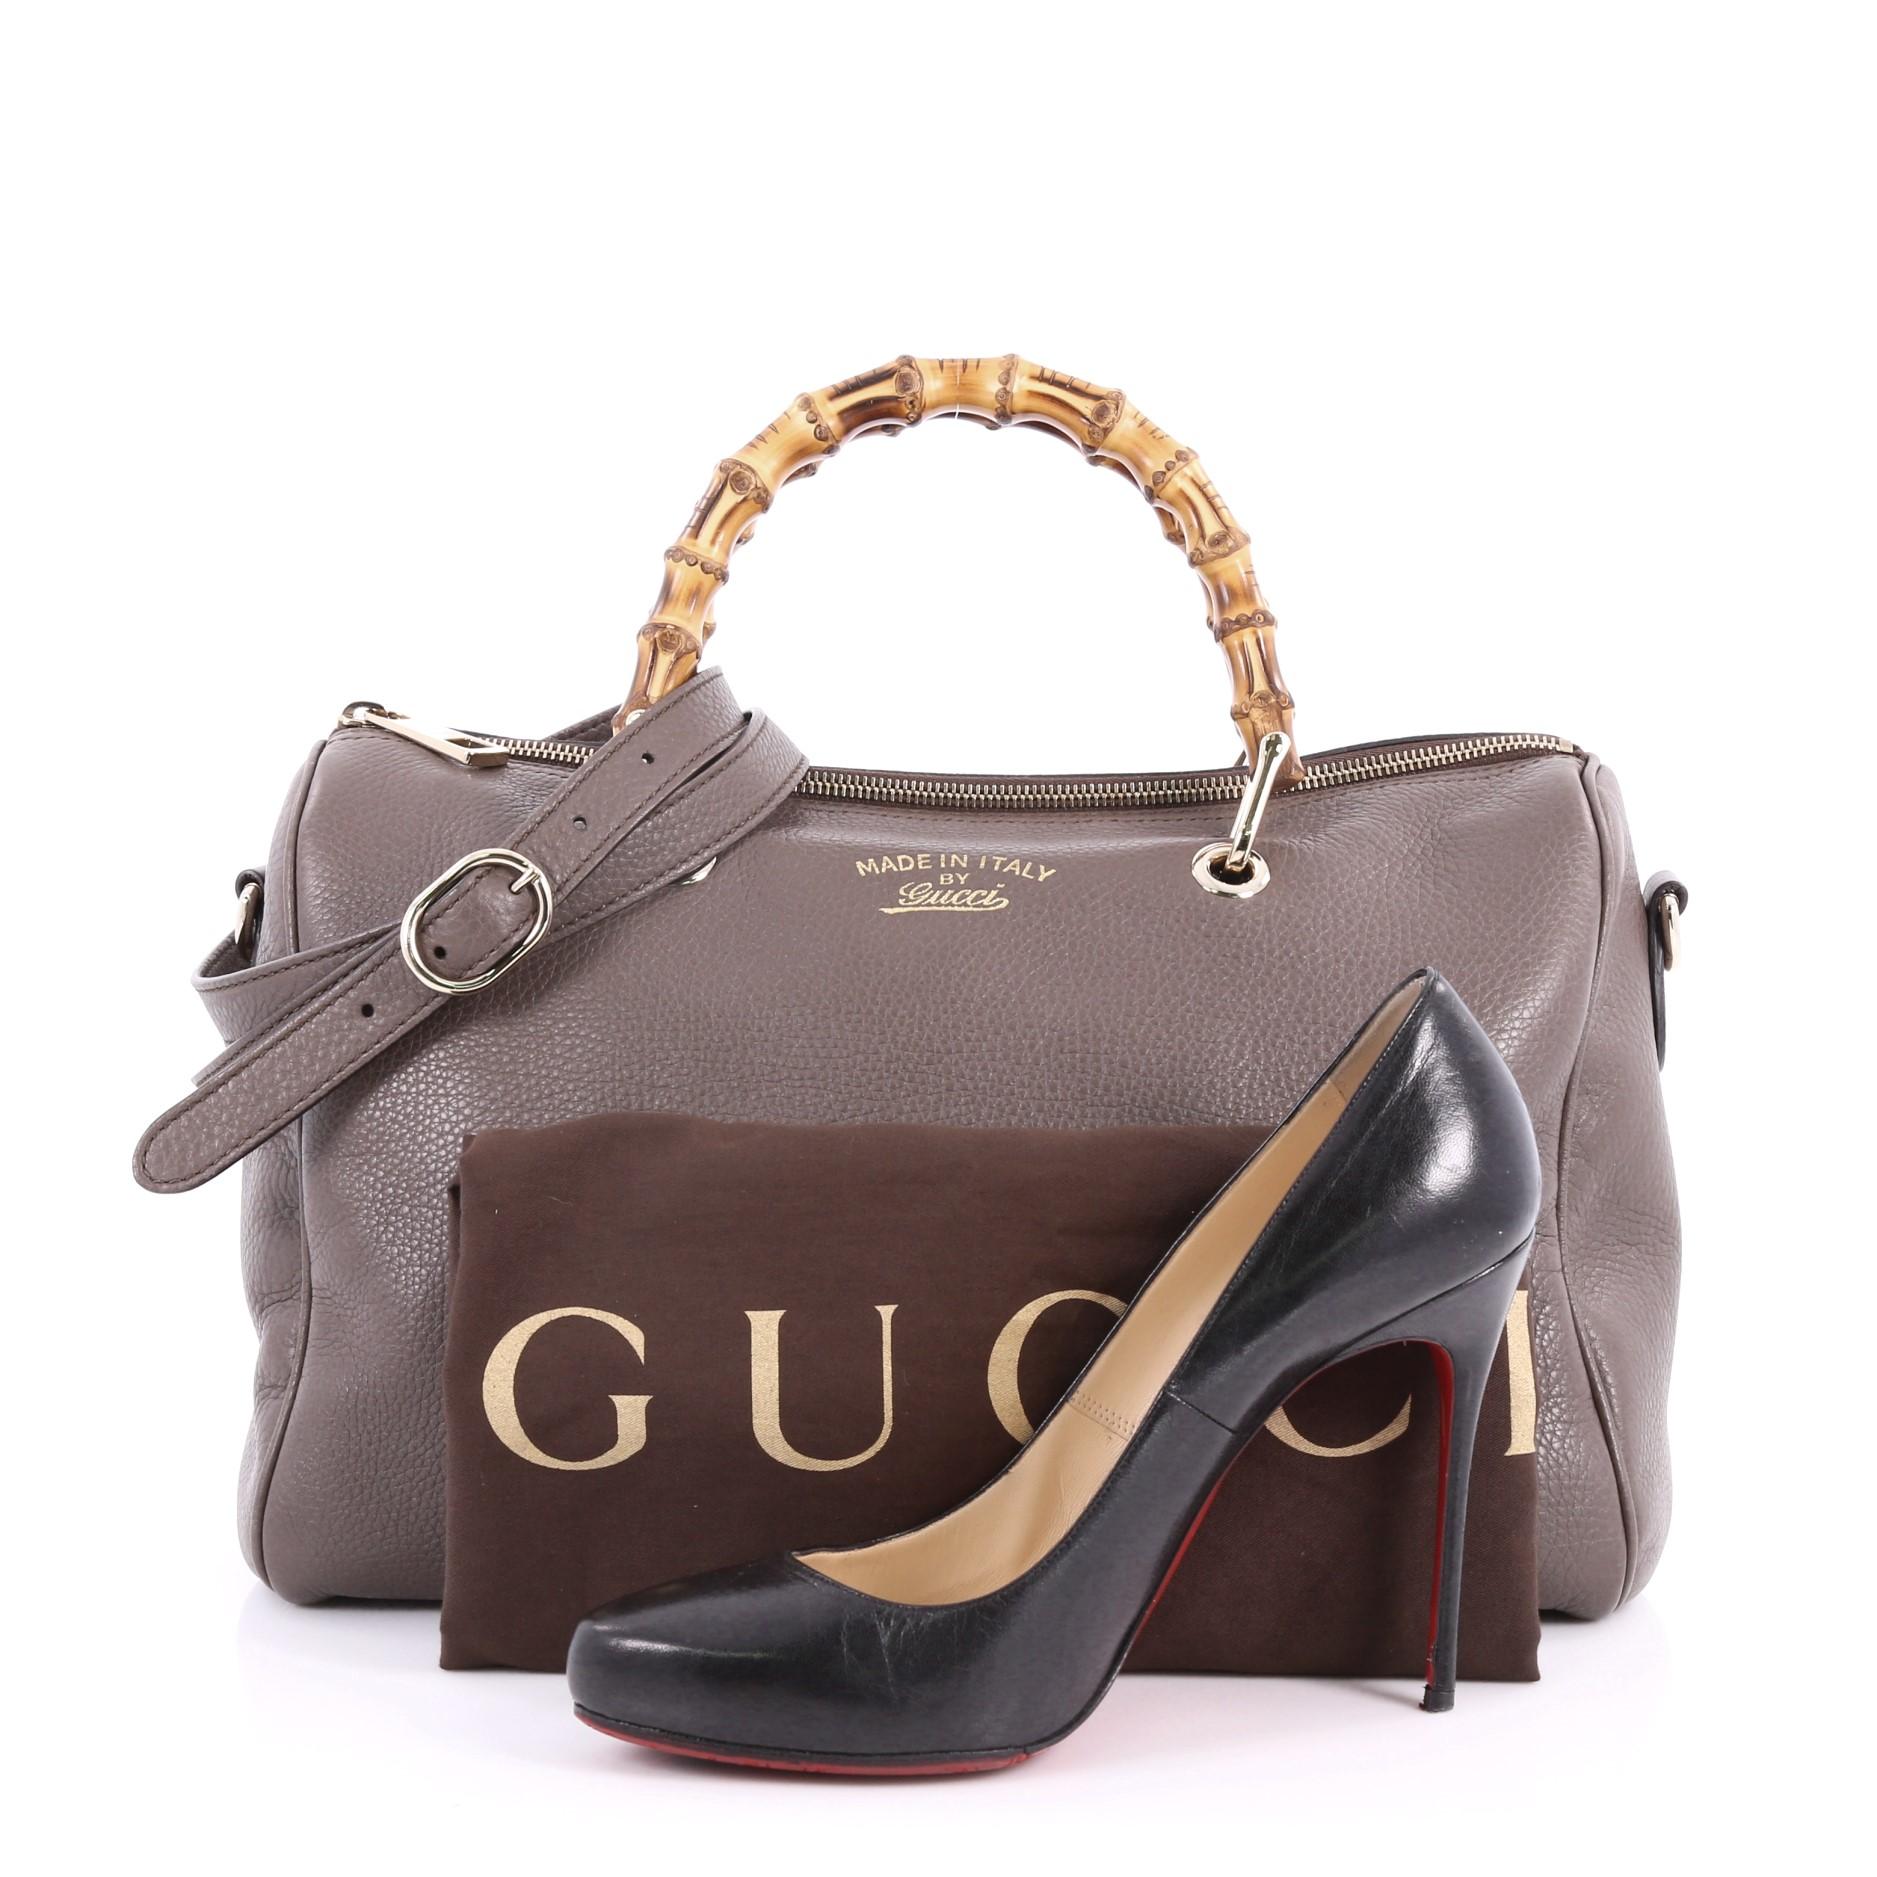 This authentic Gucci Bamboo Shopper Boston Bag Leather Medium is a classic must have. Crafted from taupe leather, this simple yet stylish bag features Gucci's signature sturdy bamboo handles, protective base studs, stamped logo at the front, and